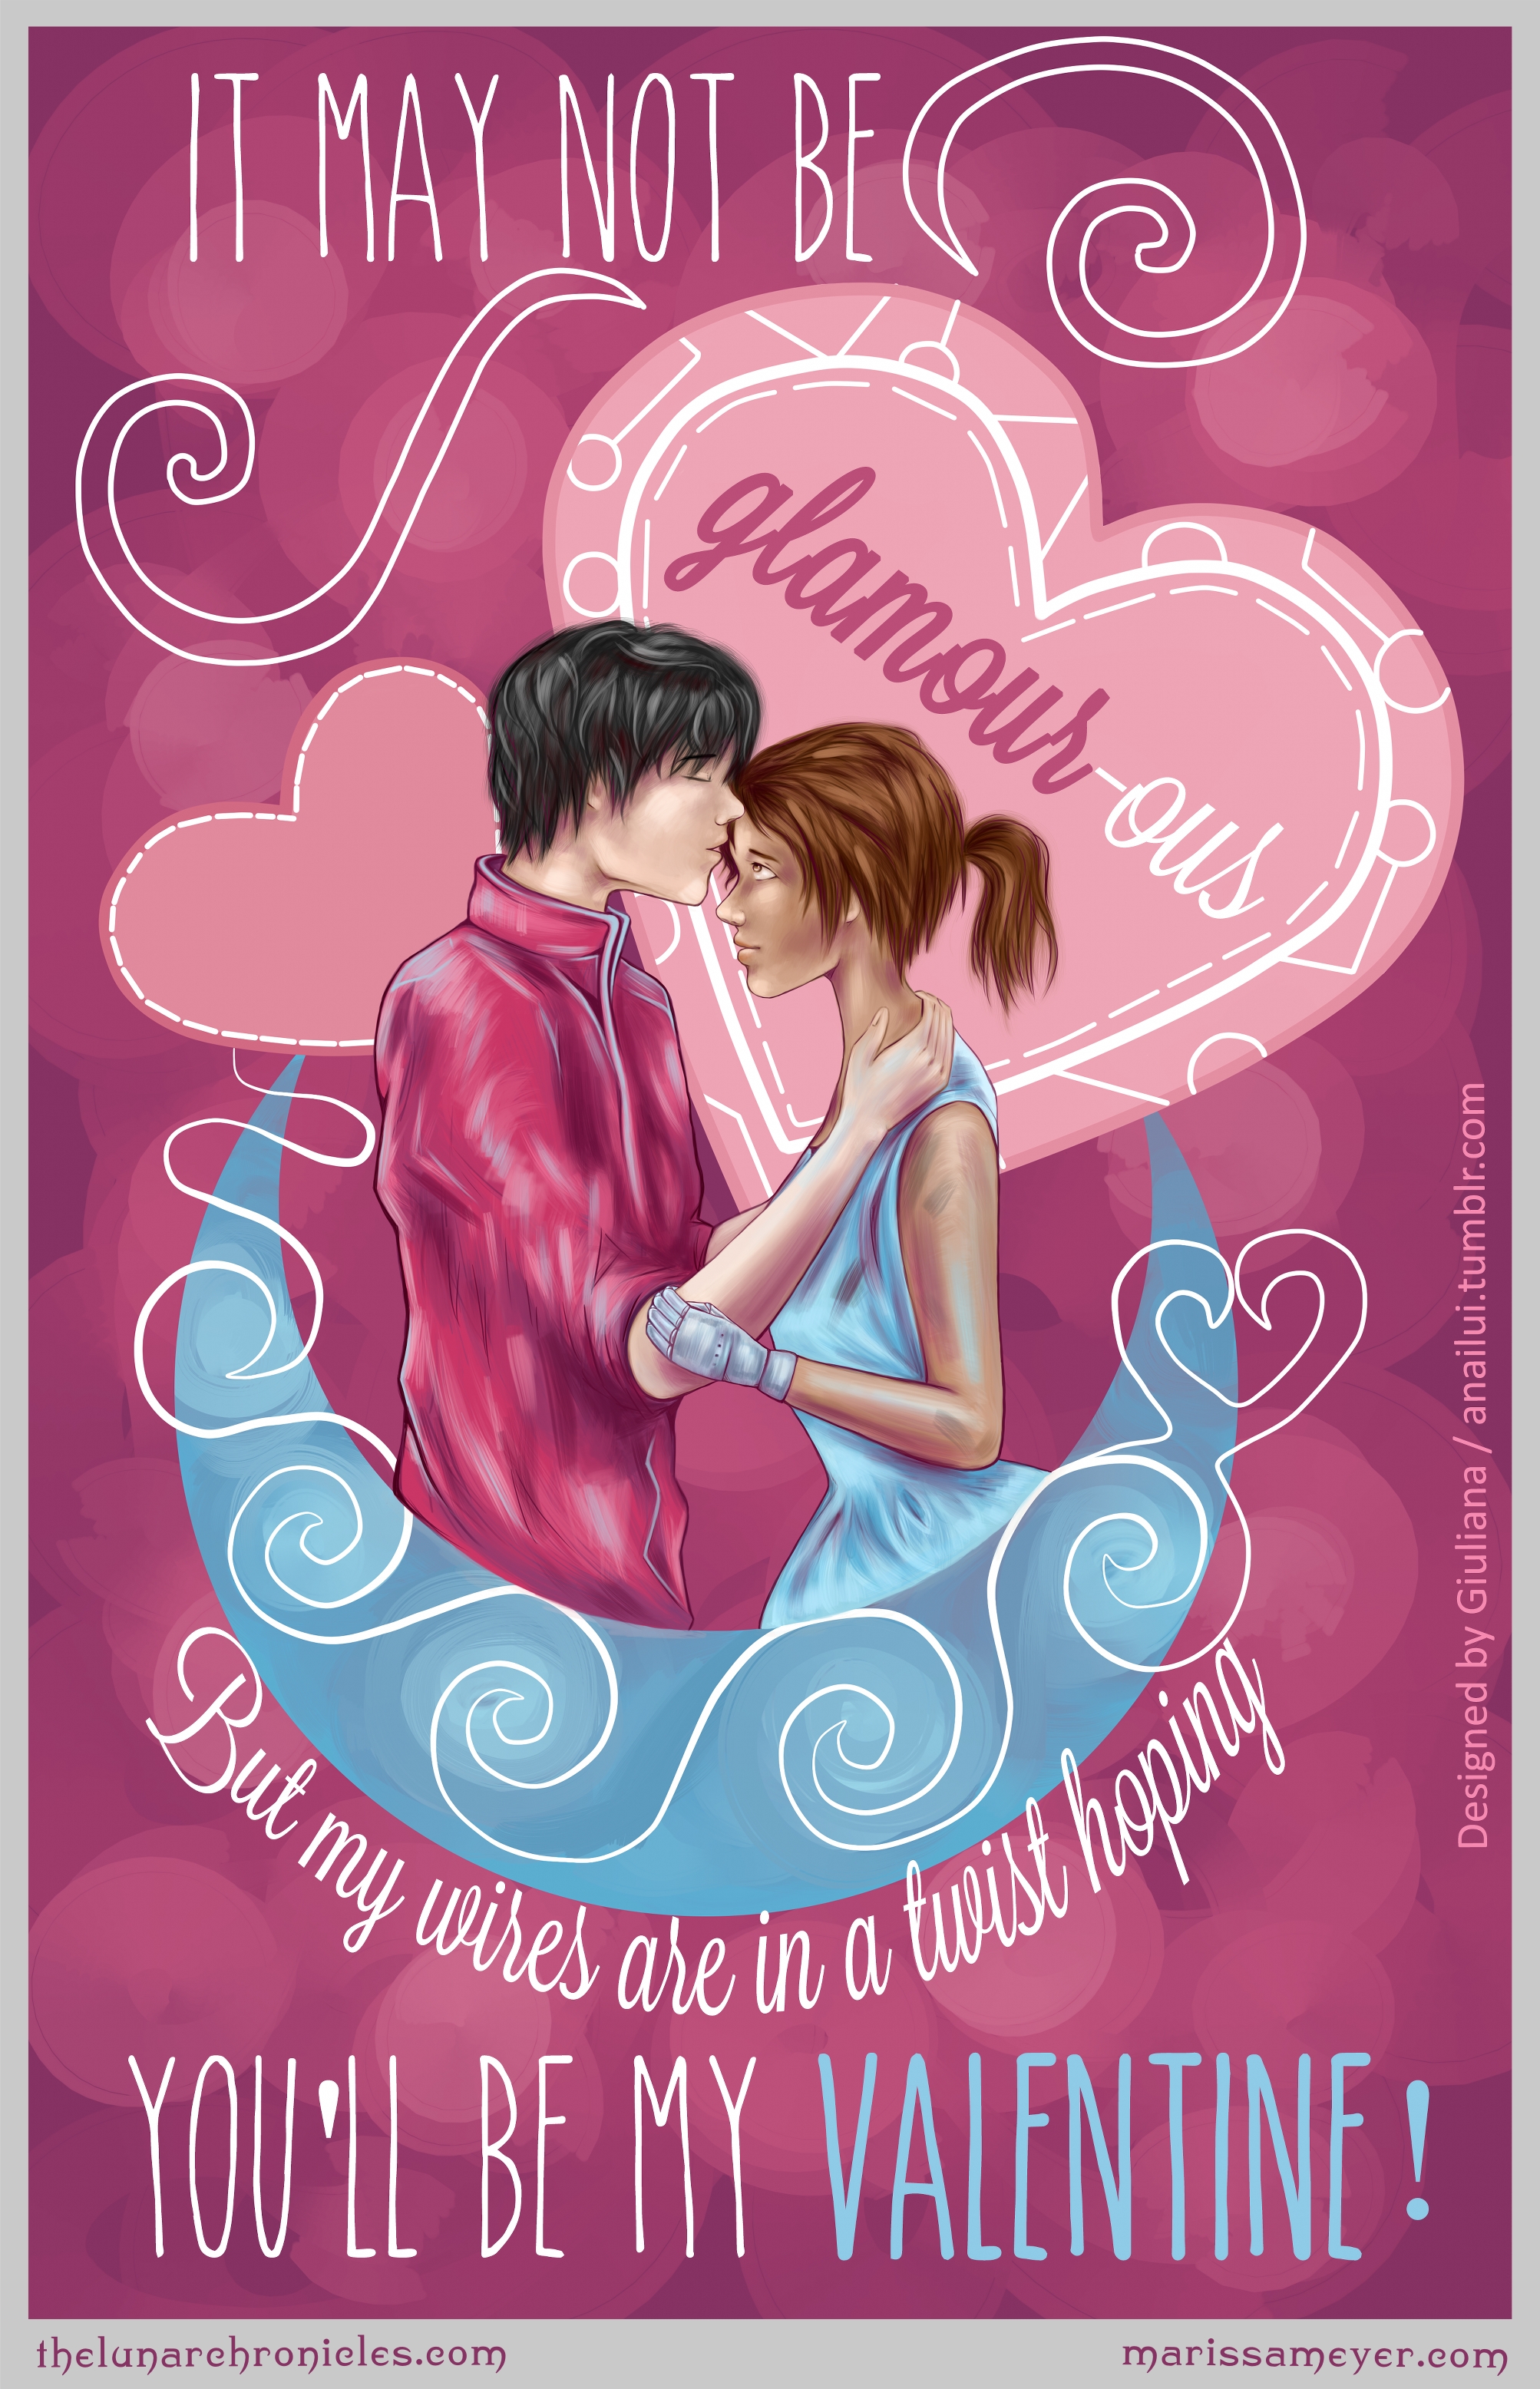 Happy Valentine’s Day from The Lunar Chronicles | Marissa Meyer